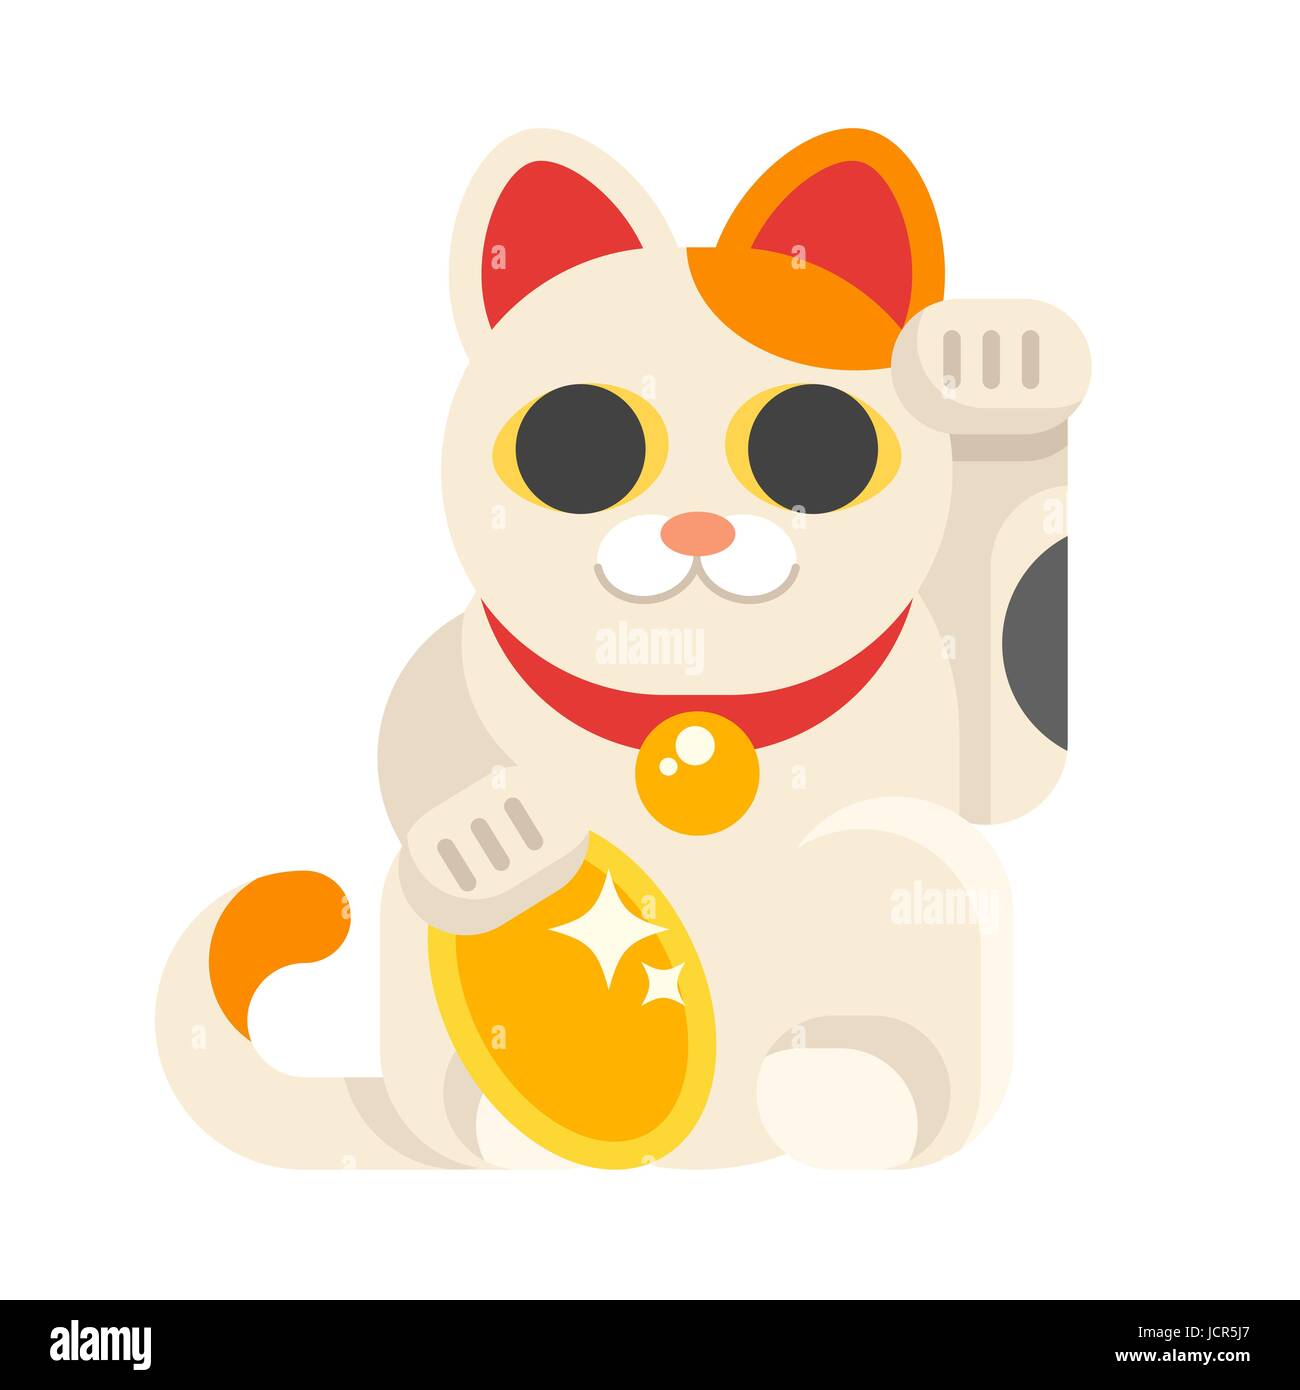 118,800+ Cat Icon Stock Illustrations, Royalty-Free Vector